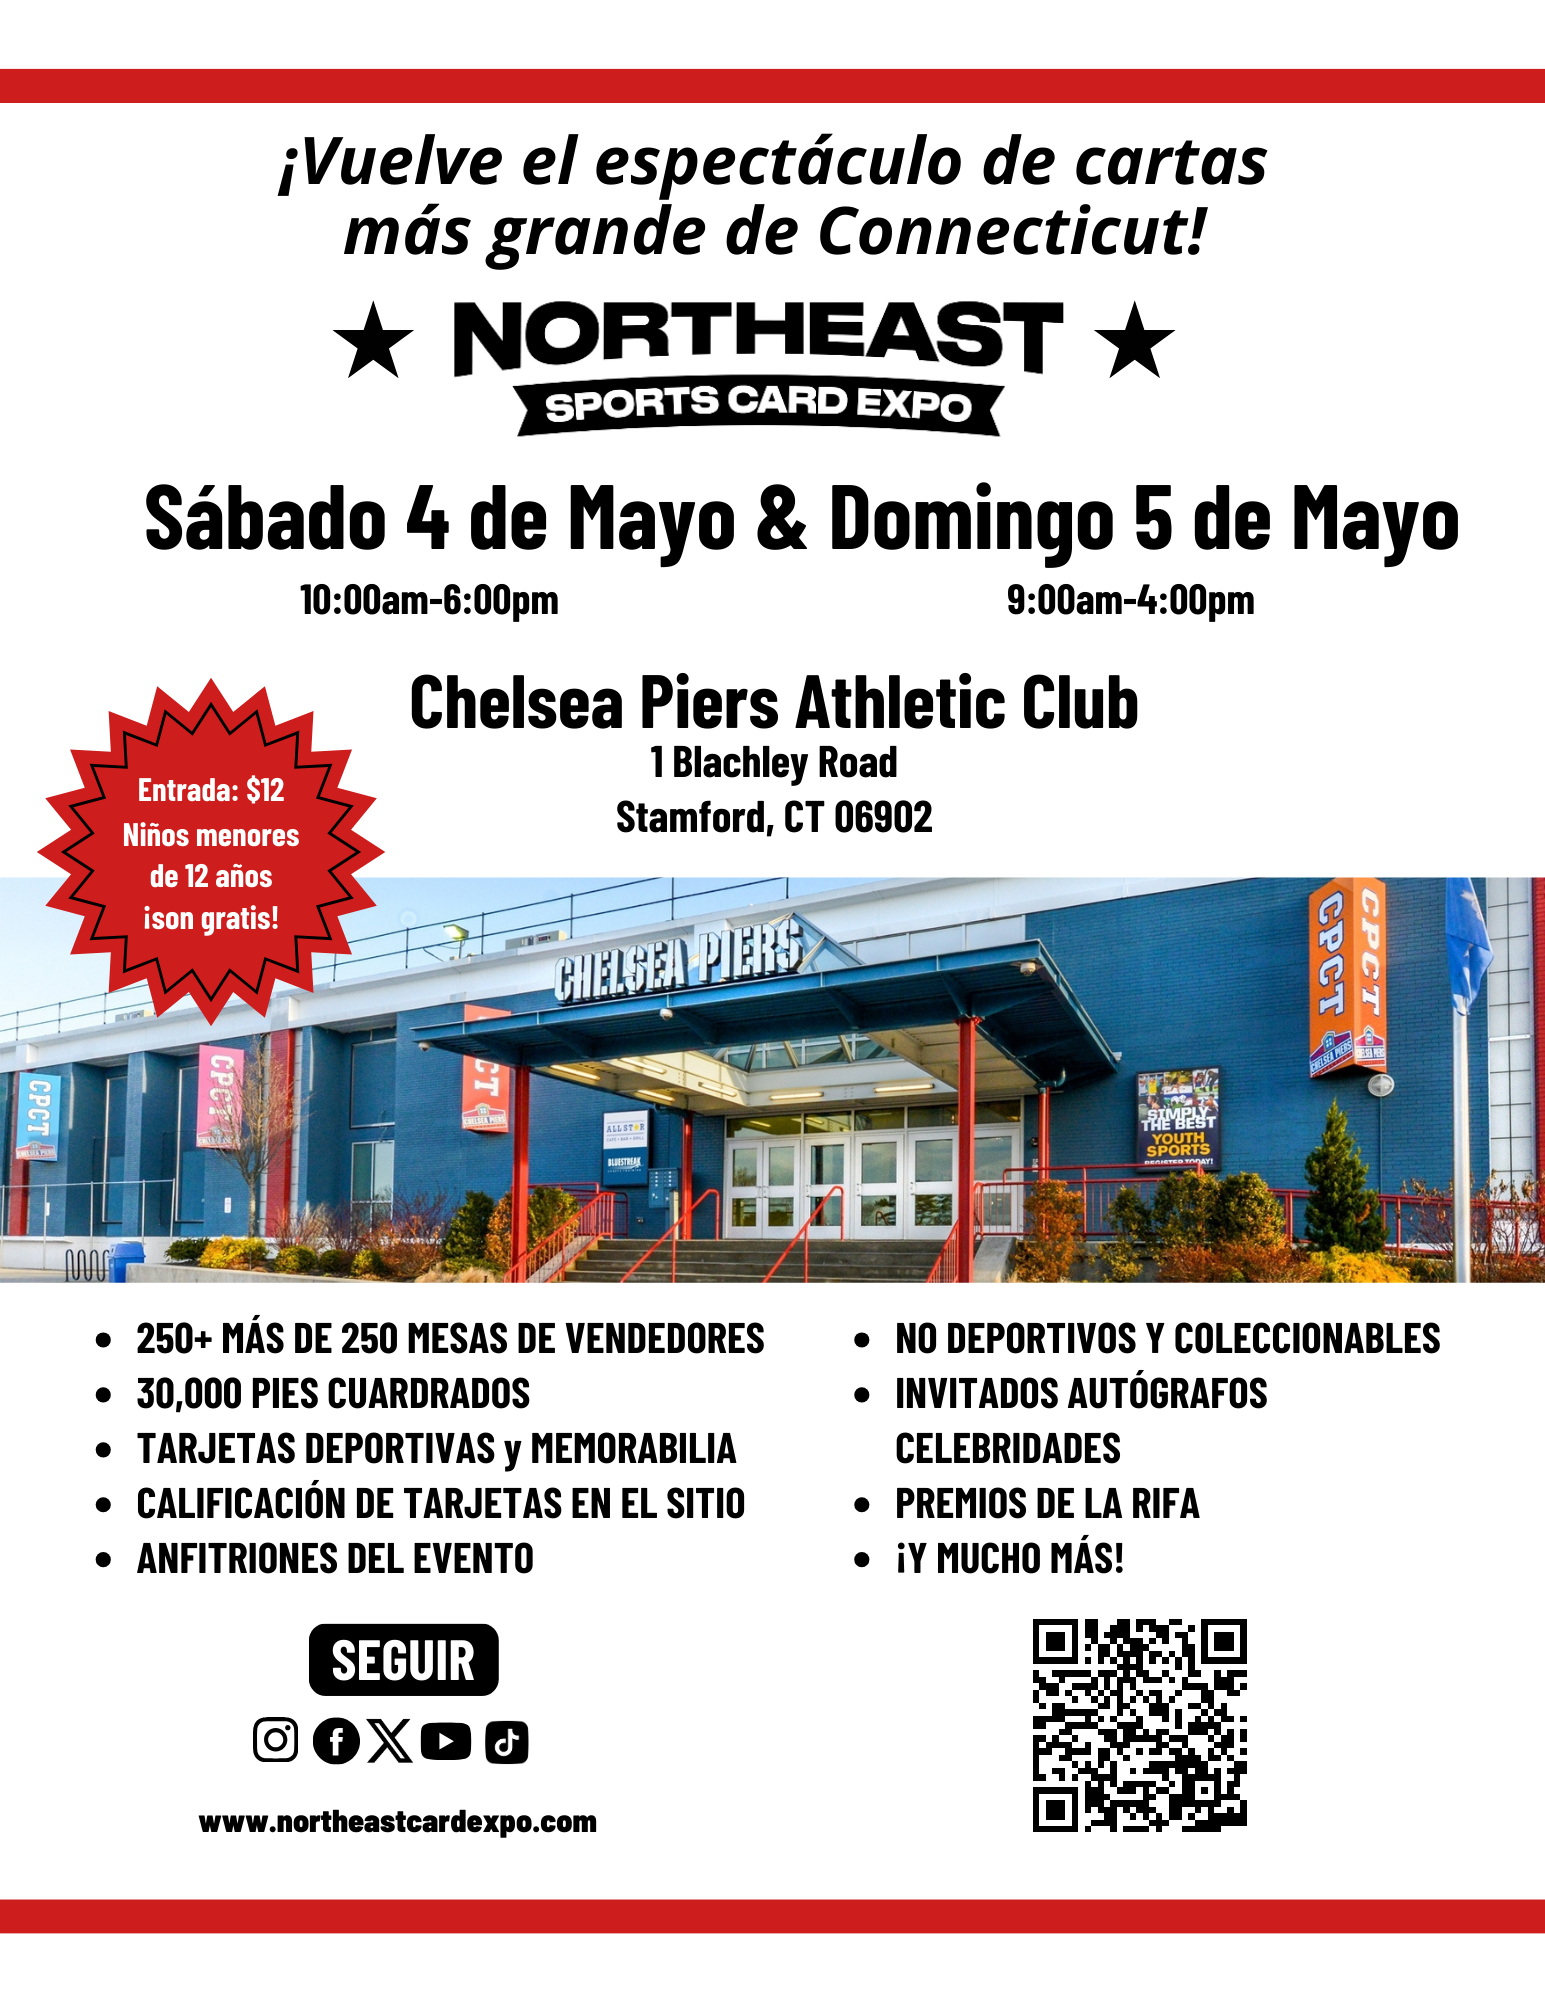 Northeast Sports Card Expo Stamford_printed_flyer_spanish version